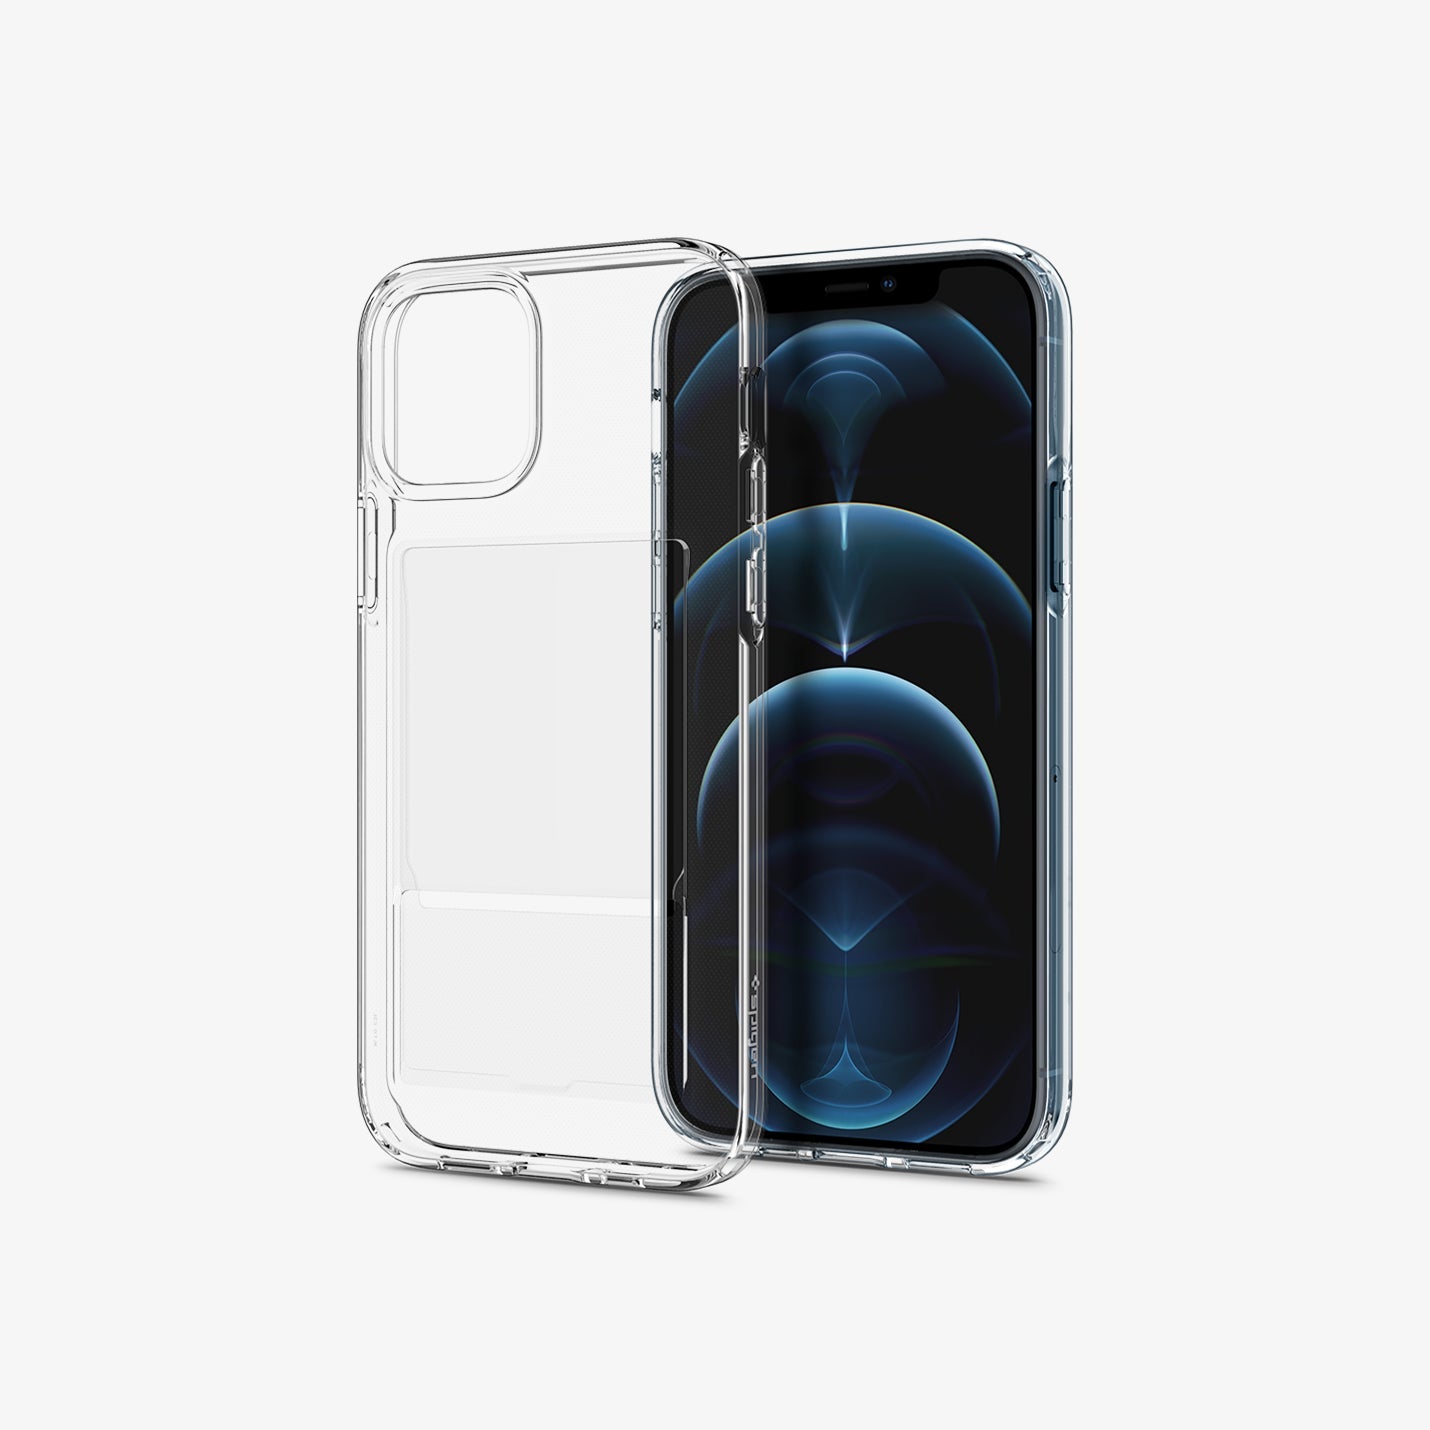 ACS02576 - iPhone 12 / iPhone 12 Pro Case Crystal Slot in crystal clear showing the back and front